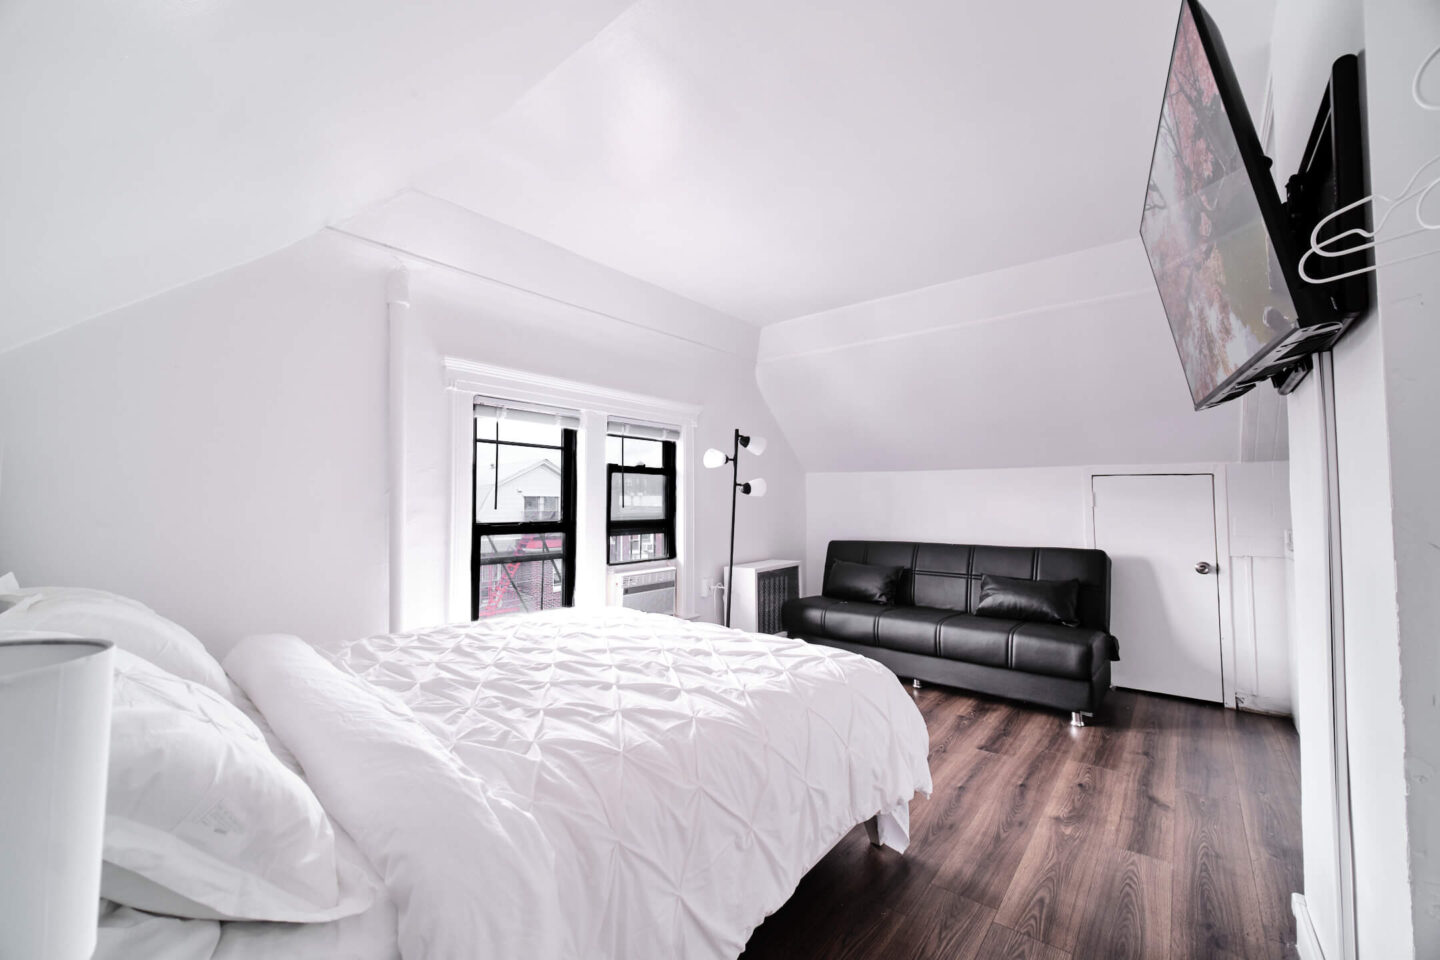 41-32 76th St, East Elmhurst, NY 11373 - Apt 7 - Real Estate Photography - AirBnB Listing